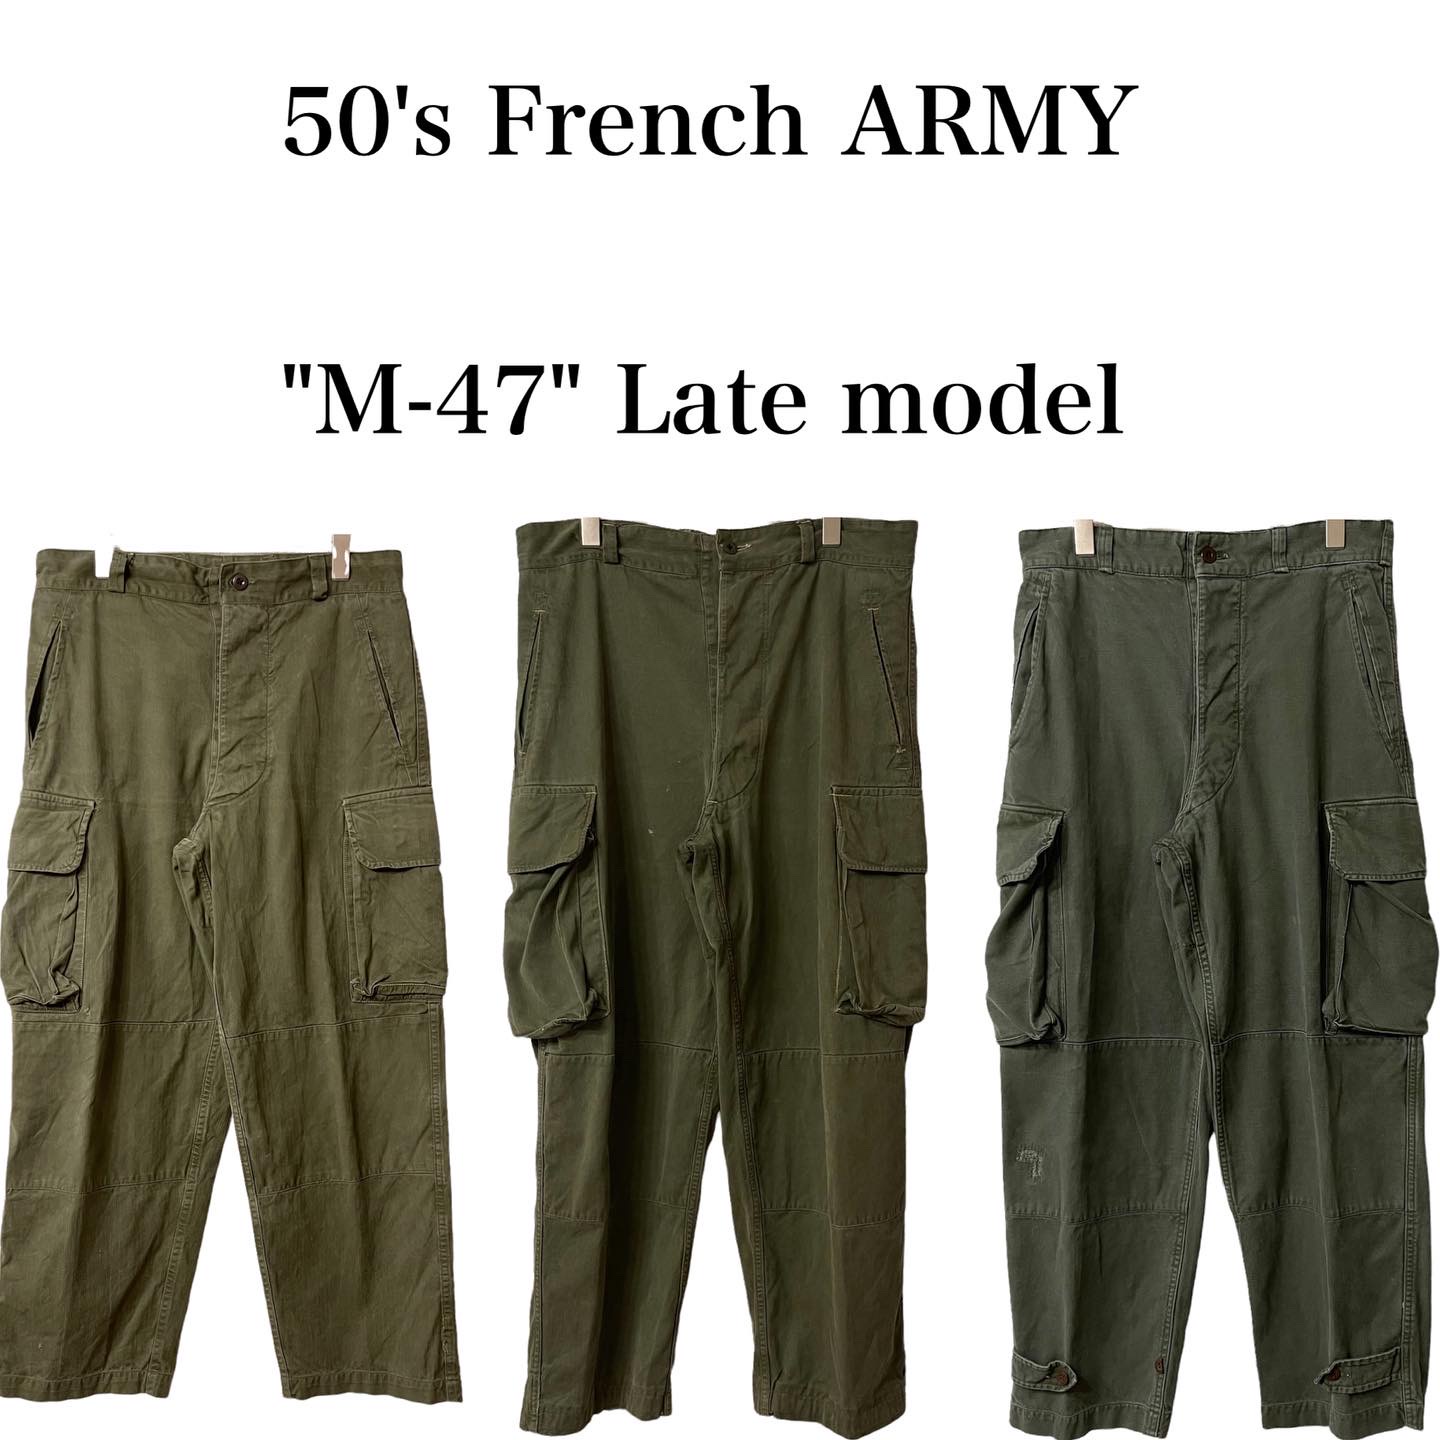 50's French ARMY M-47 cargo pants発売開始‼️